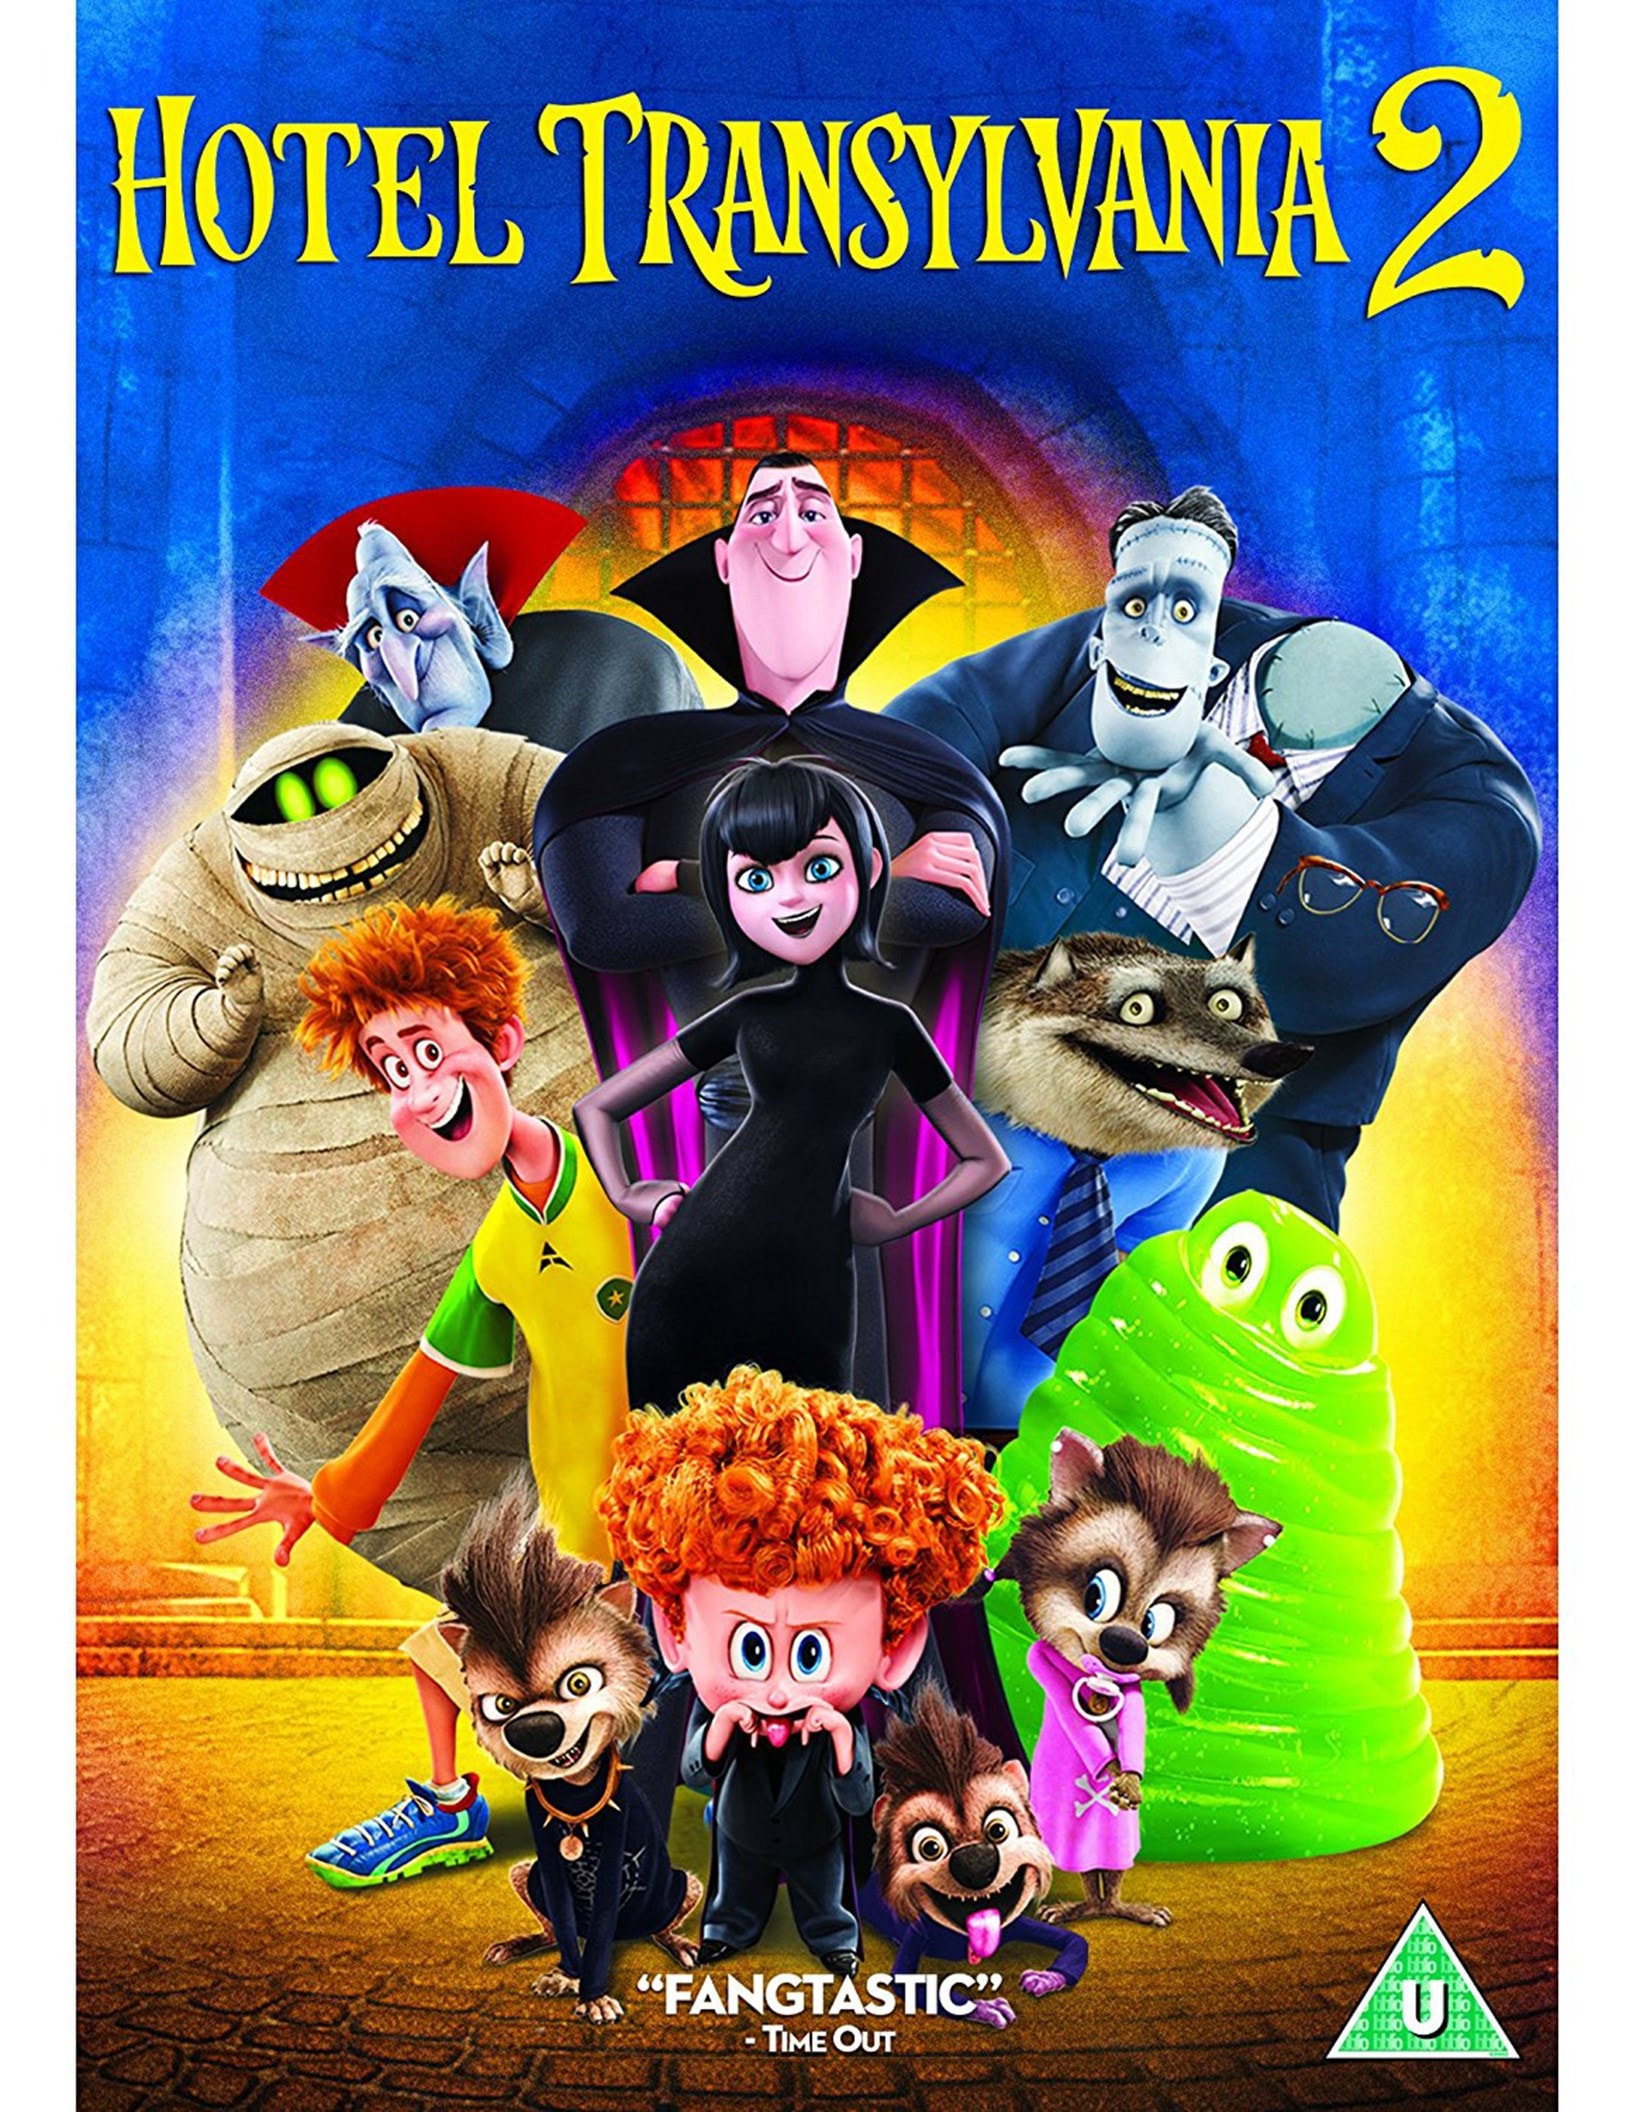 Hilarious new trailer for Hotel Transylvania 3: A Monster Vacation ...